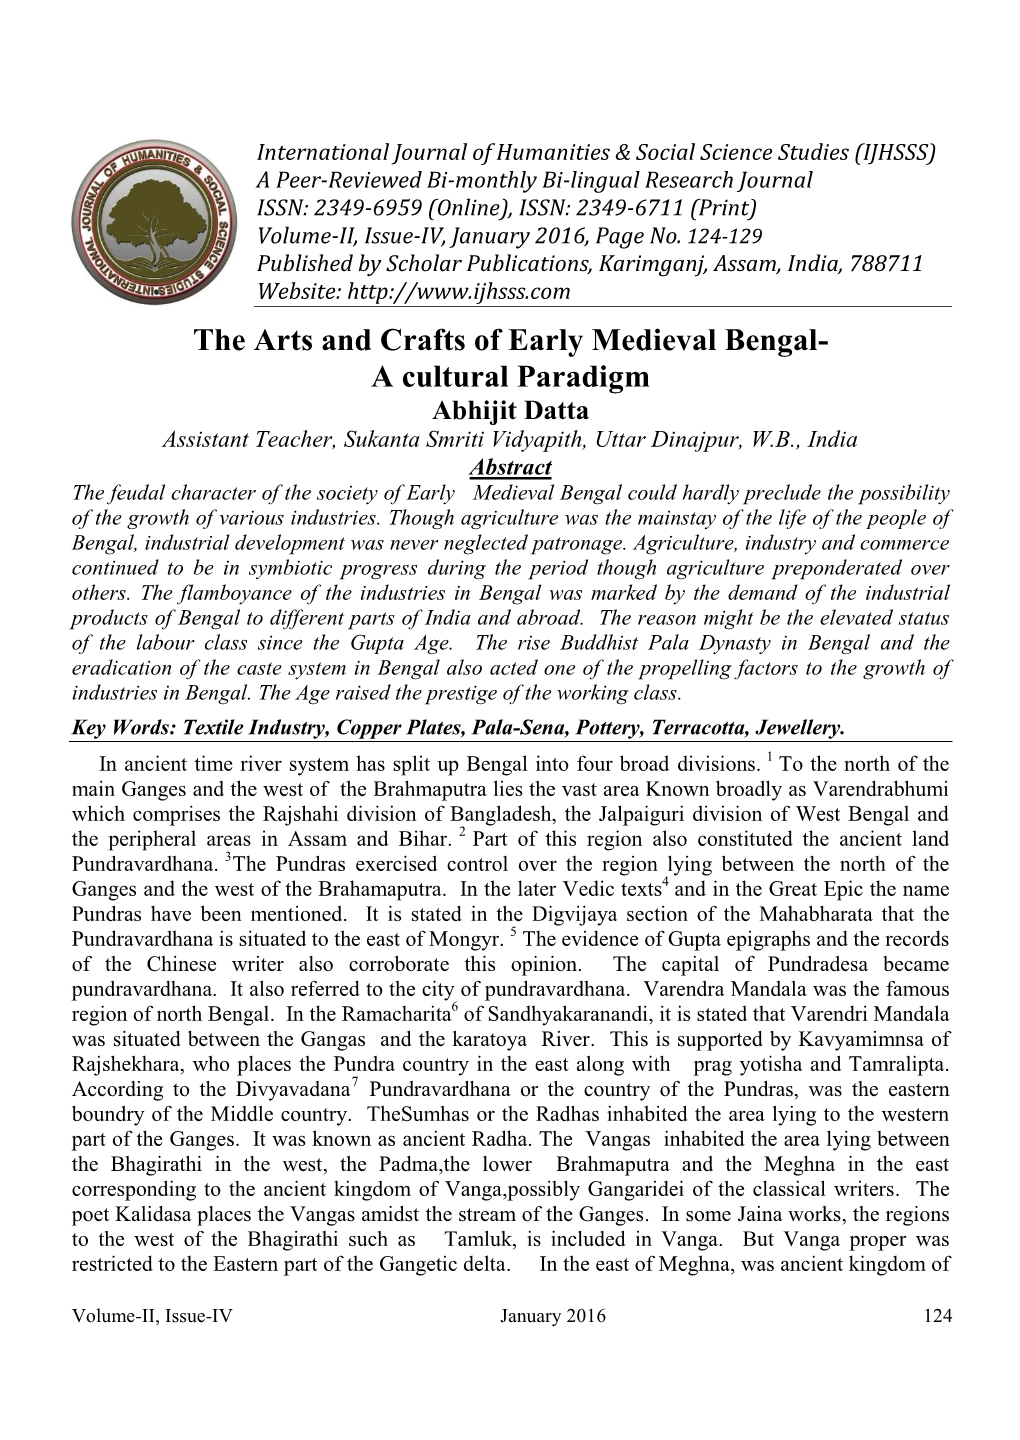 The Arts and Crafts of Early Medieval Bengal- a Cultural Paradigm